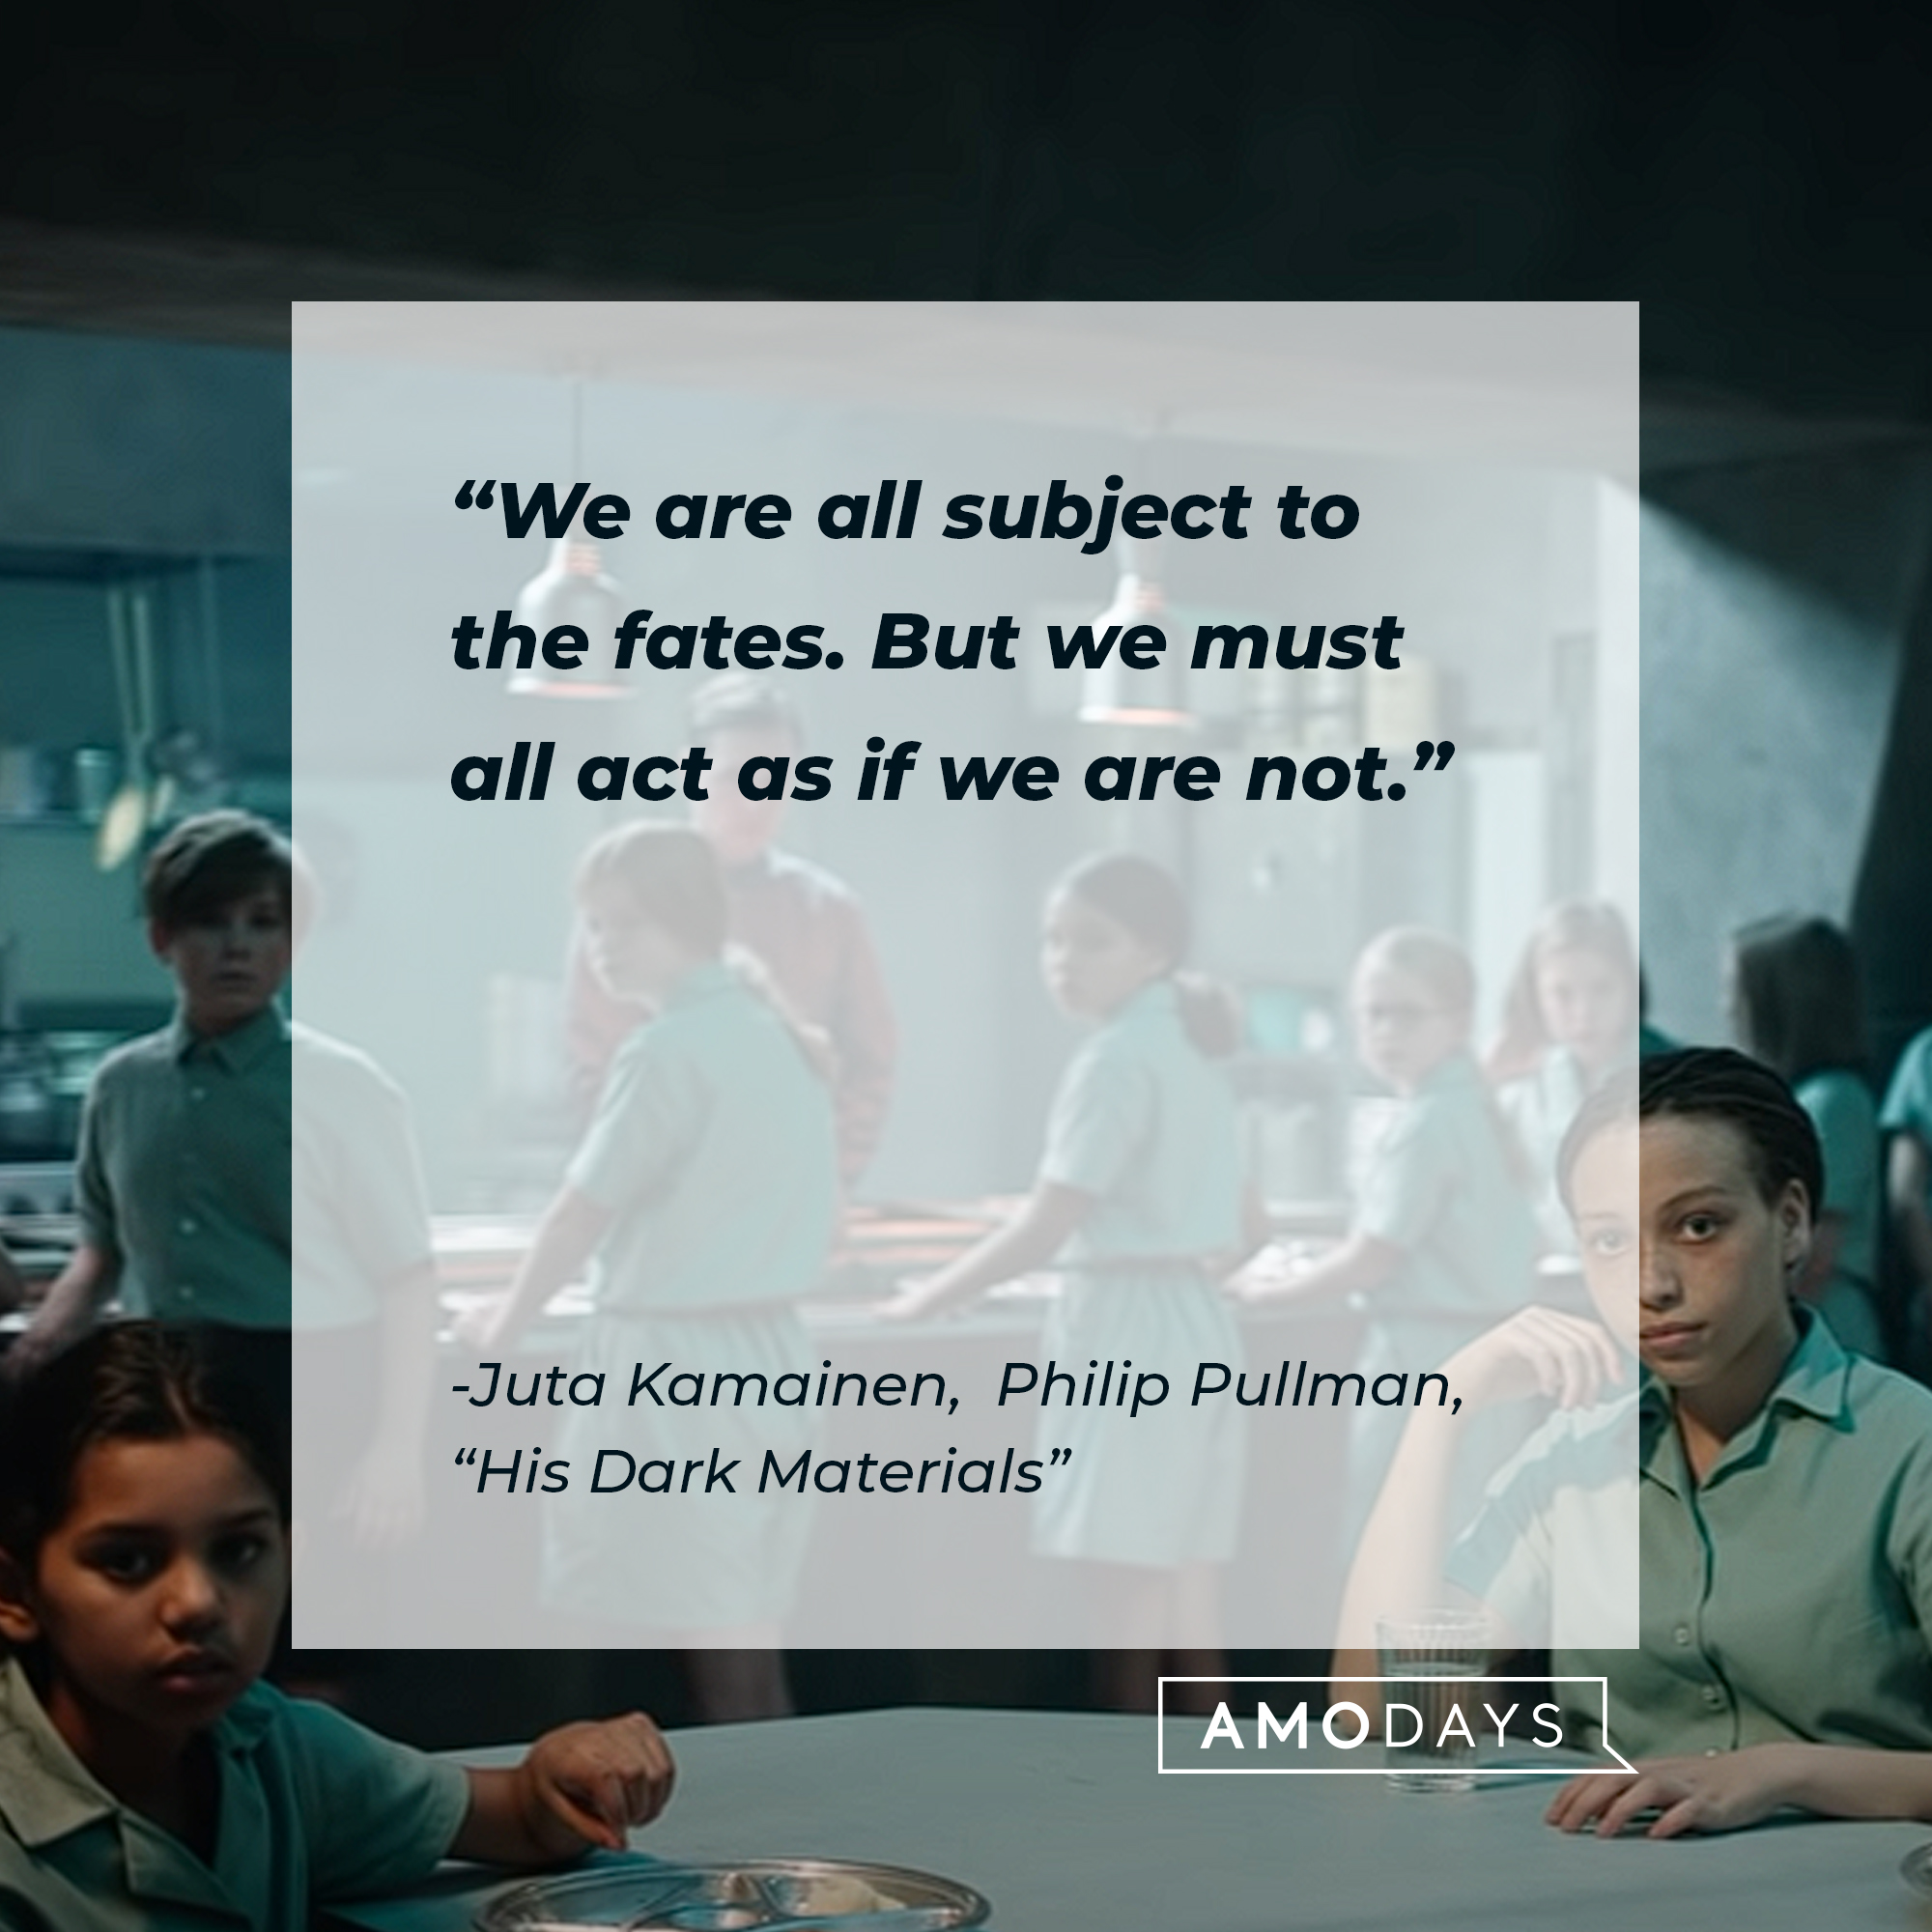 An image from the series "His Dark Materials" with a quote from the character Juta Kamainen: “We are all subject to the fates. But we must all act as if we are not.” | Source: youtube.com/HBO